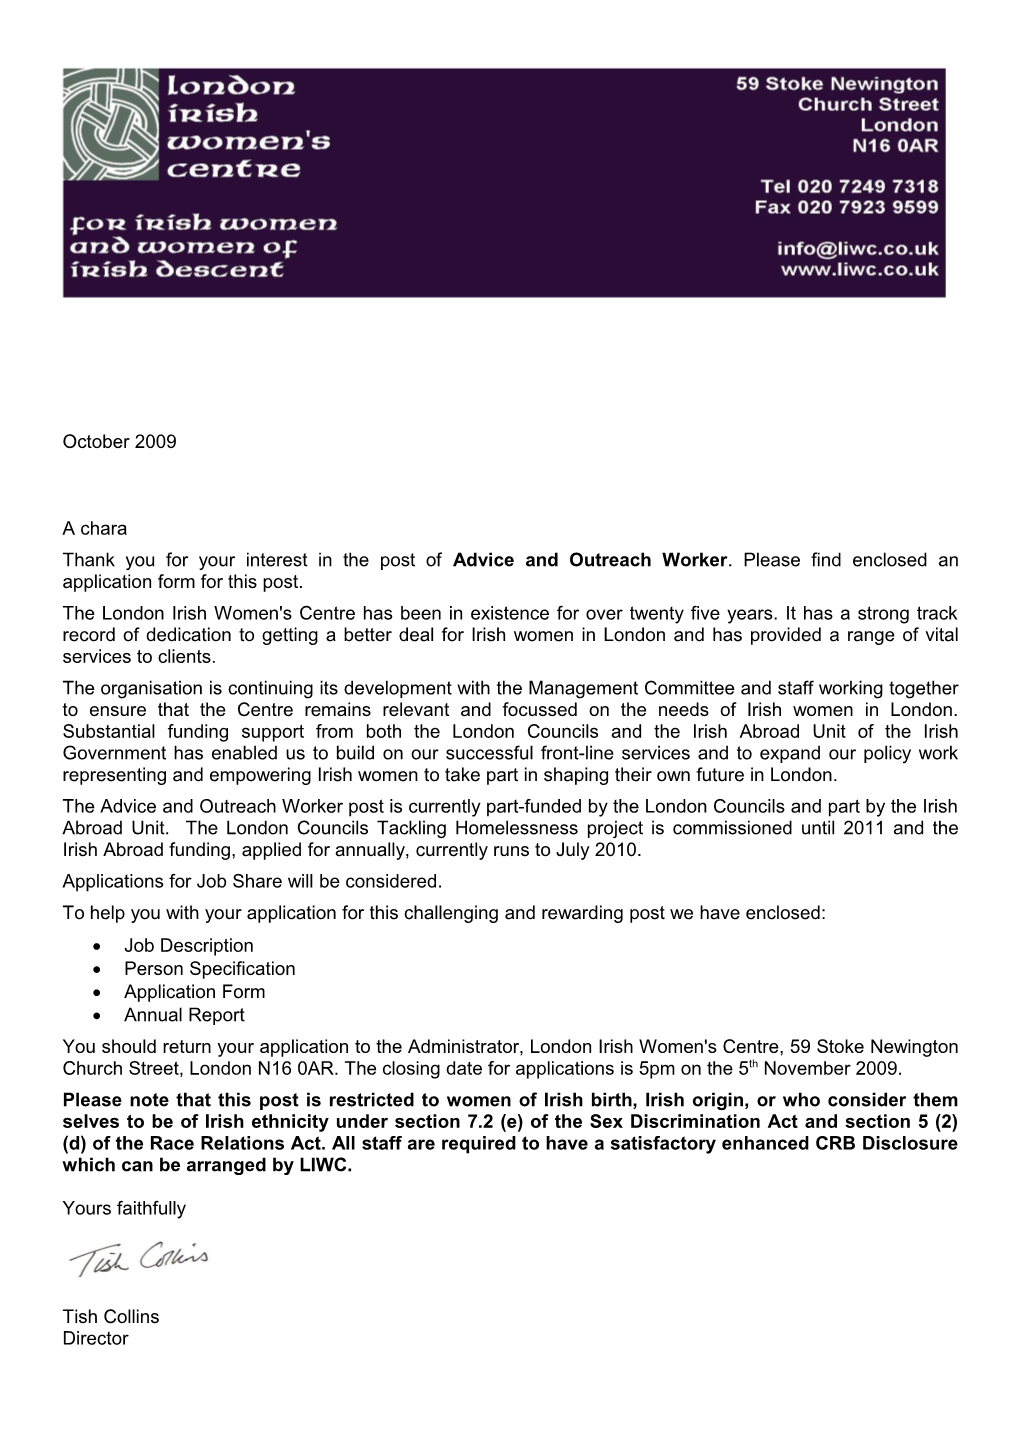 Thank You for Your Interest in the Post of Advice and Outreach Worker . Please Find Enclosed